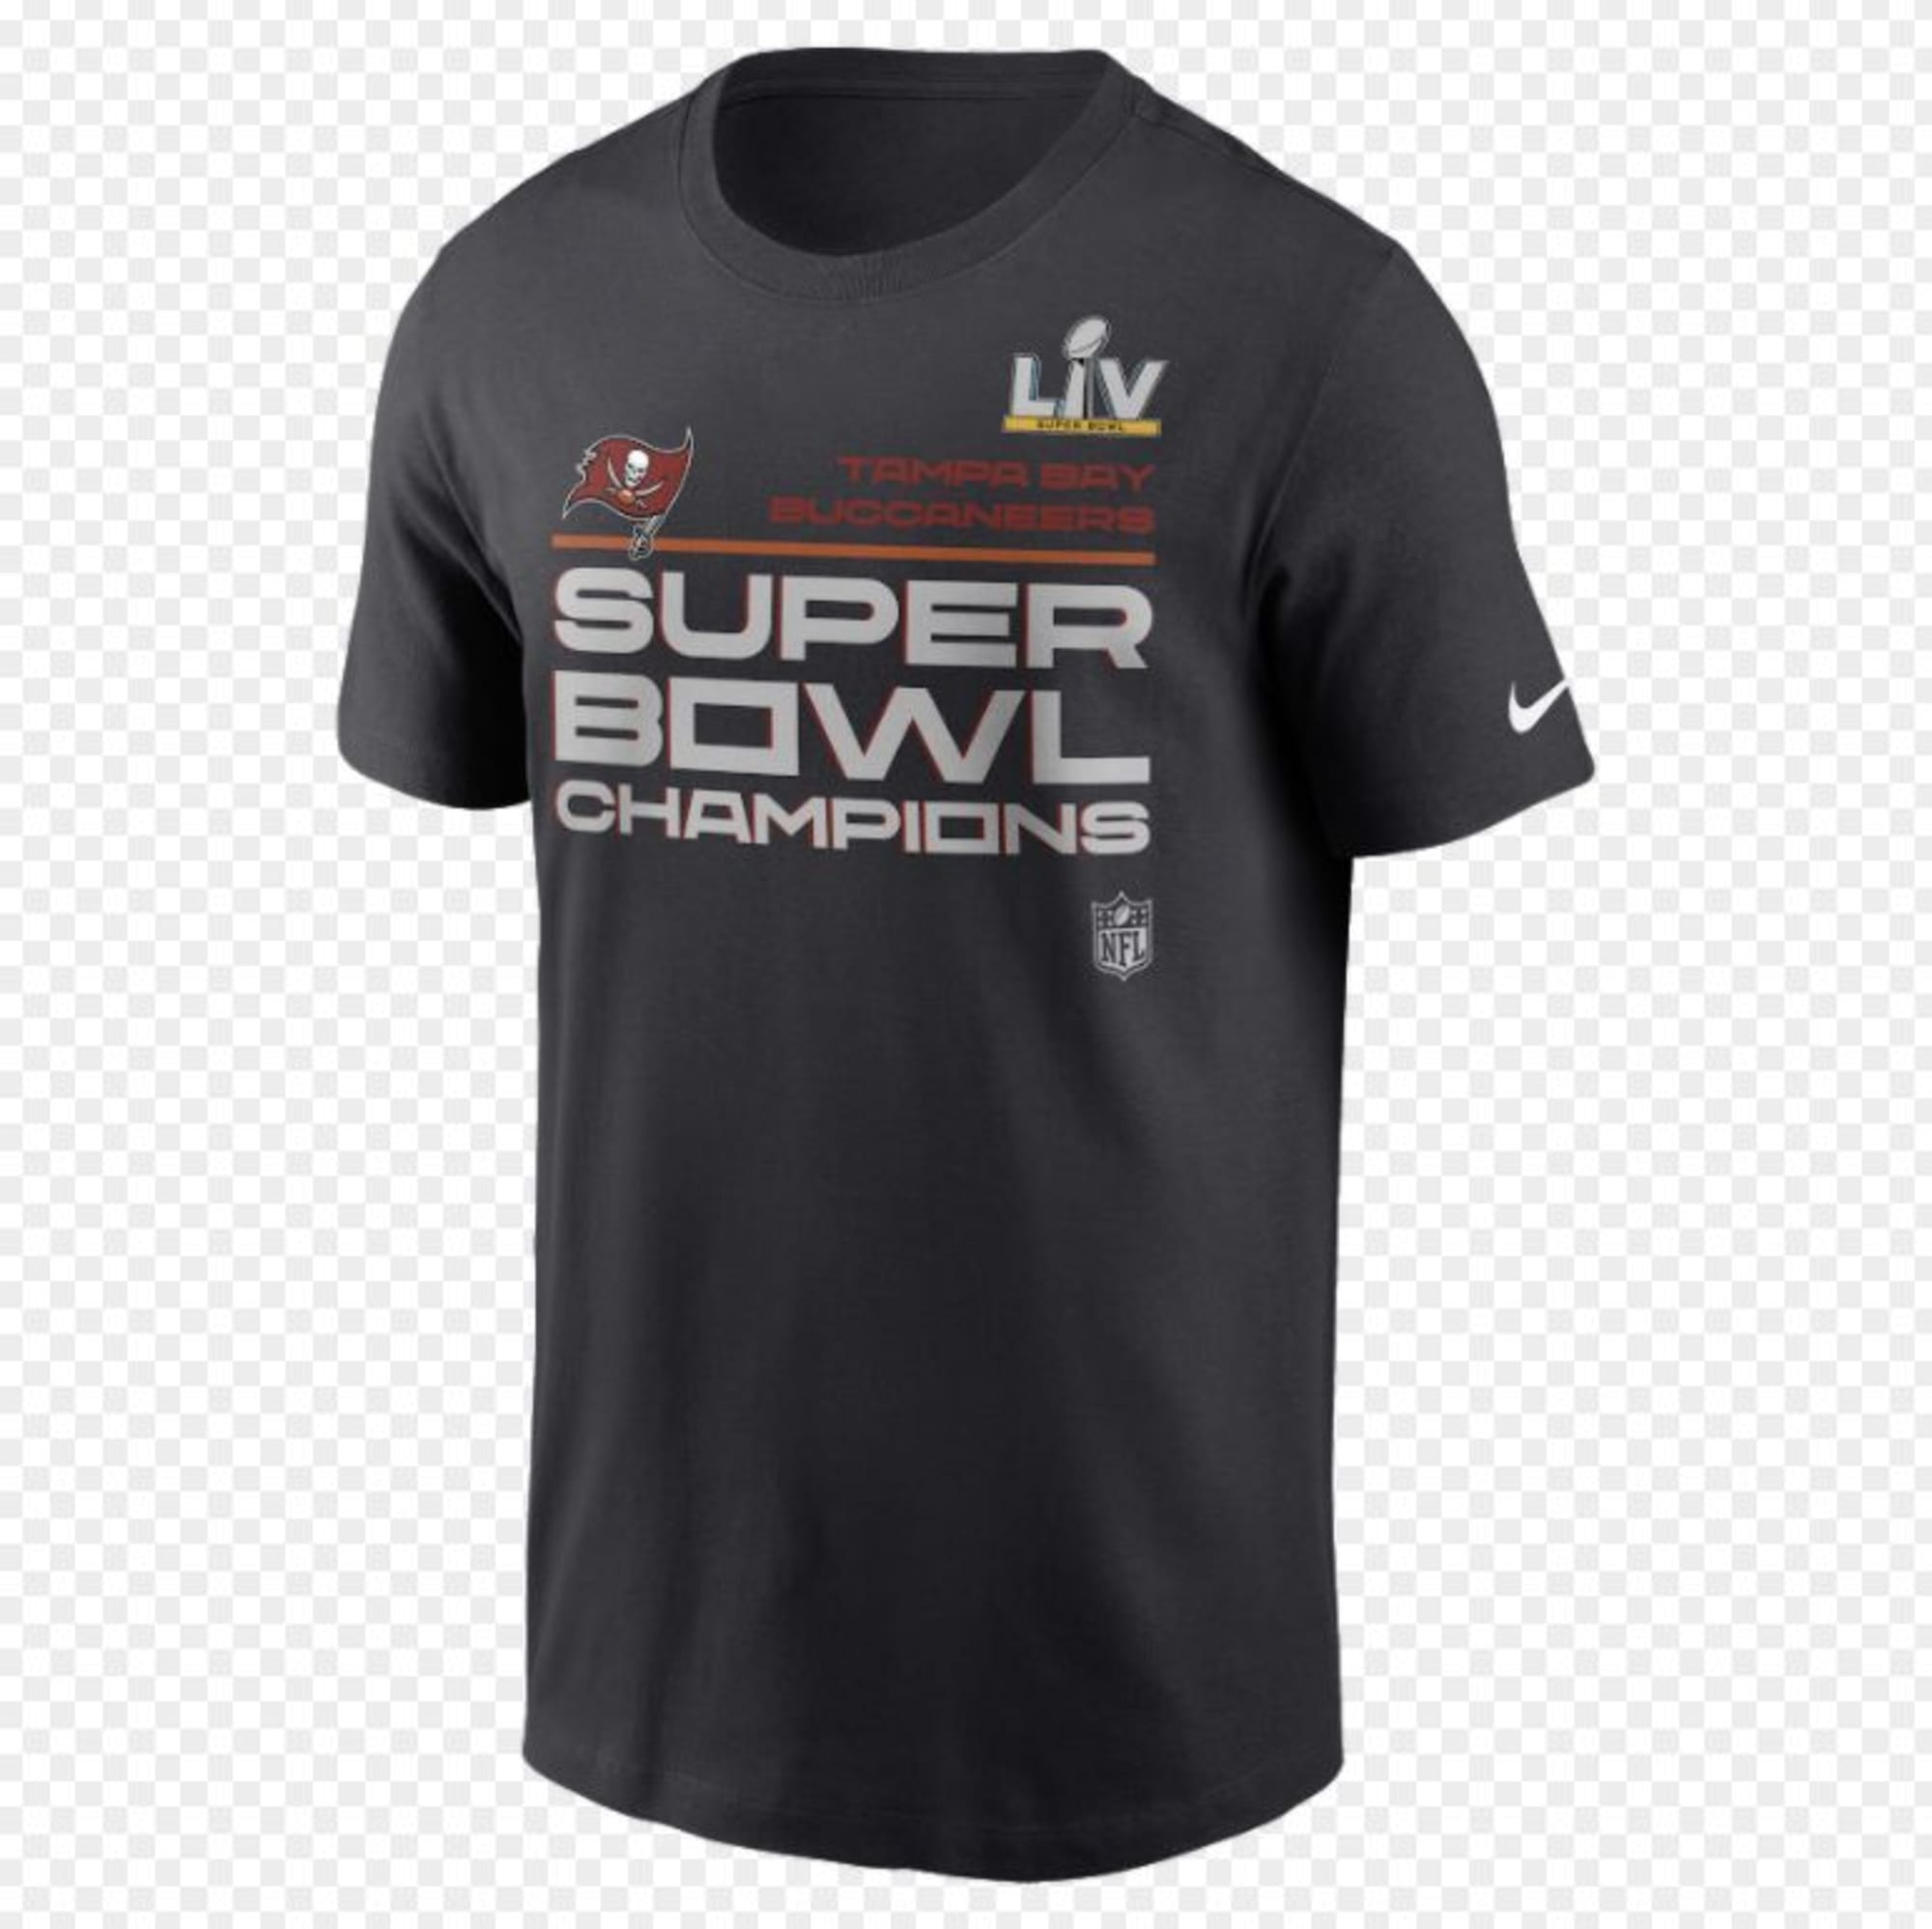 Champs! Celebrate Tampa Bay's Super Bowl win with new gear.